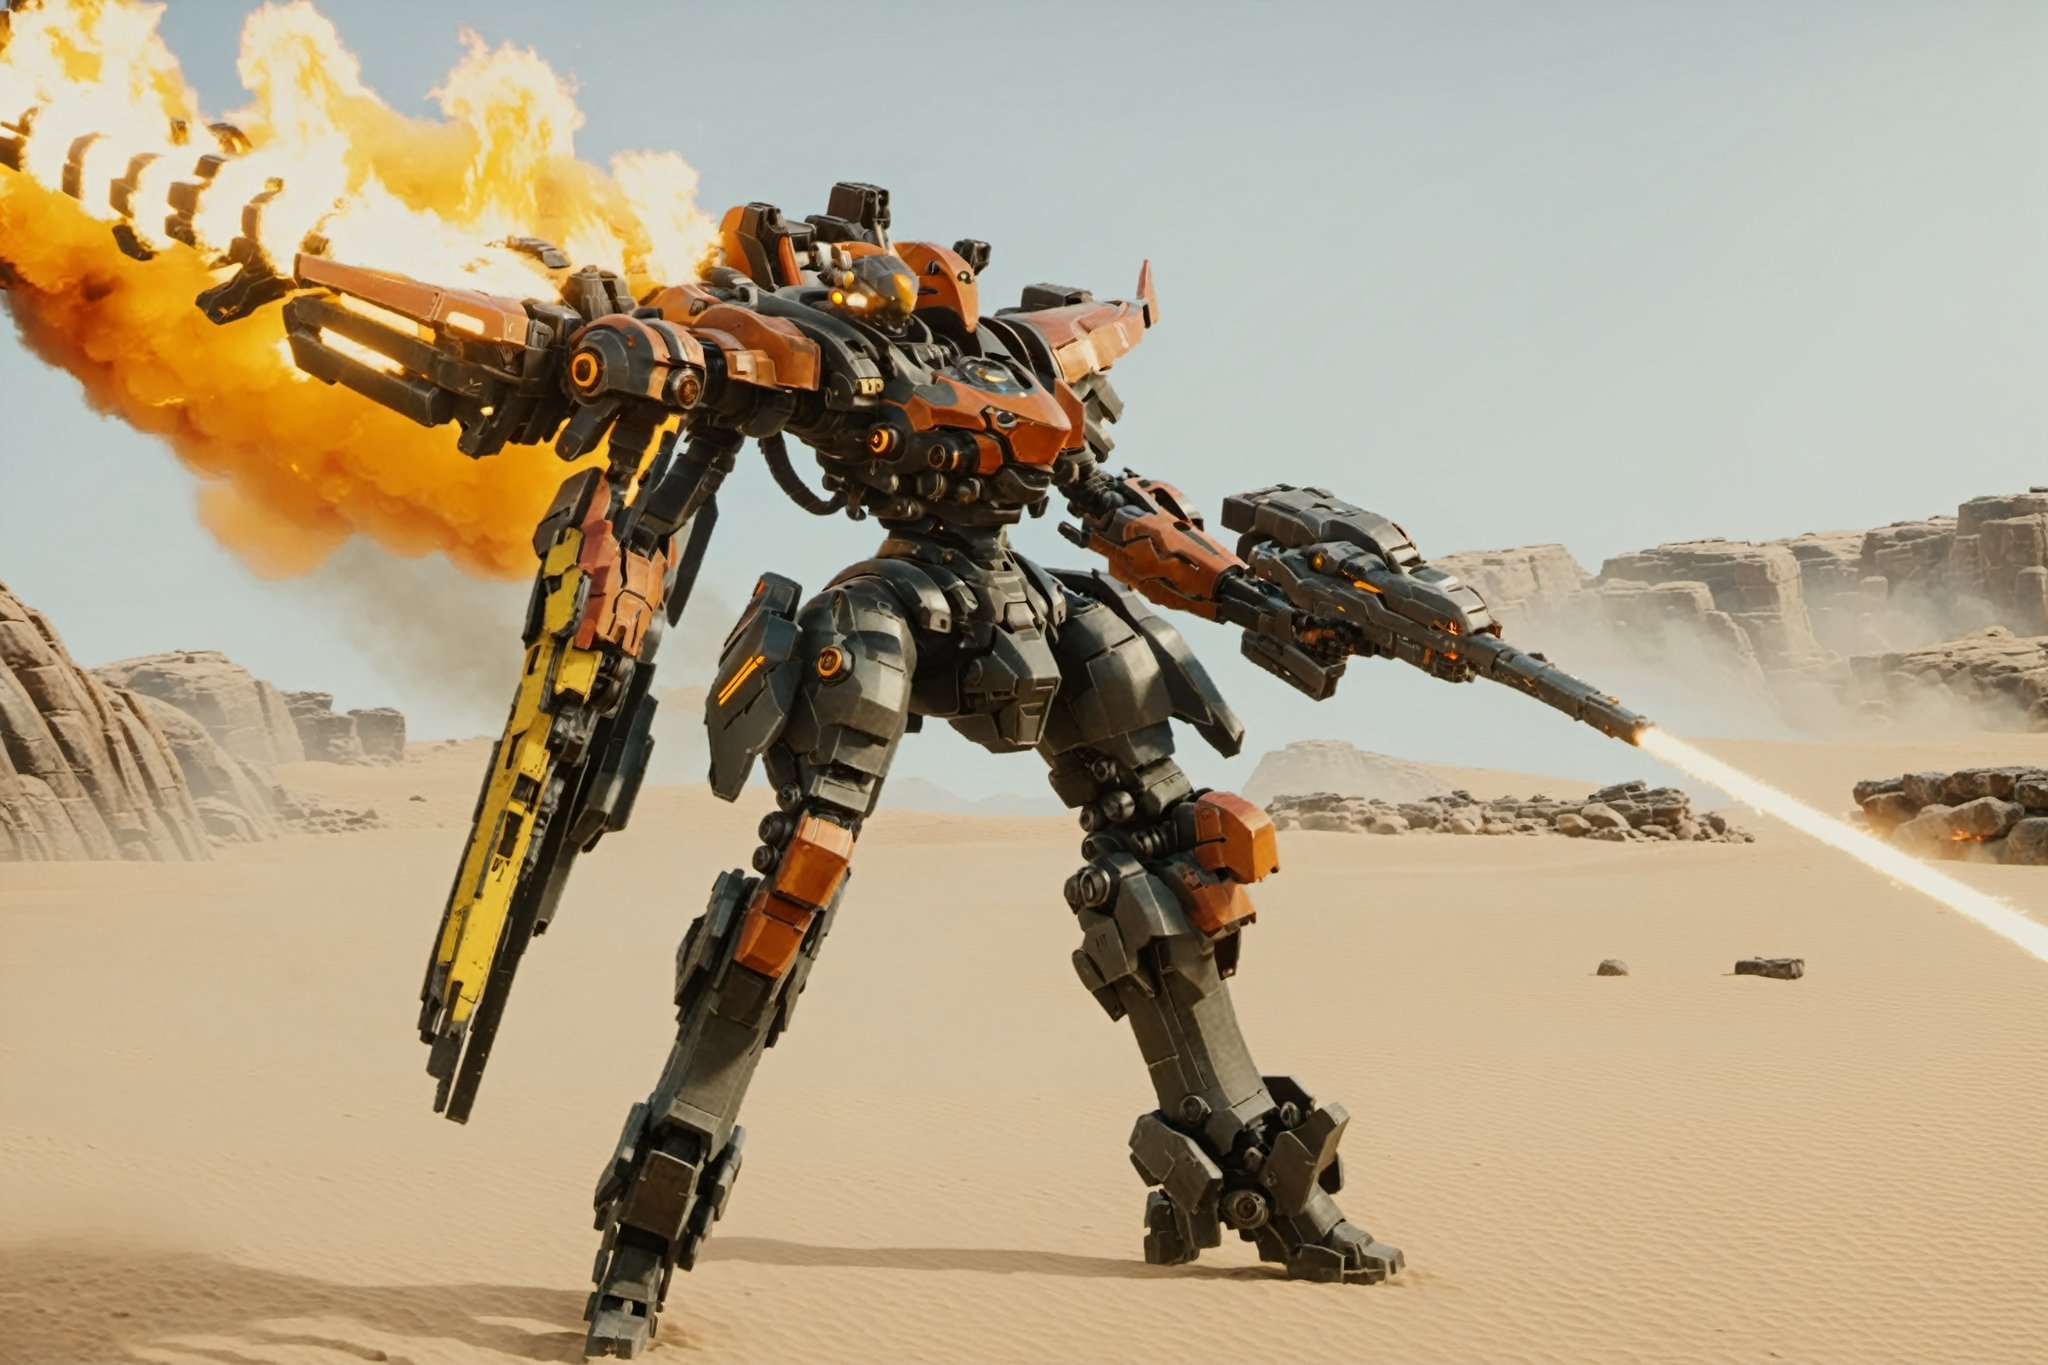 4k, 8k, (((masterpiece))), (((best quality))), (((ultra high res))), dramatic atmosphere, raytracing, subsurface scattering, gritty sand worn textures on armor, full body cinematic shot photo of a zaku mech aiming and shooting a sci-fi flame thrower and holding a glowing blade jet pack thrusters ignited about to take flight over a mech base and arch in moab utah, mech wrecks on fire scattered around smoking, insanely detailed mech head, insanely detailed head helmet, 4k fire, cinematic fire , mech shooting flamethrower, stream of flame, 4 leg mech companion with cannon, mech base in canyon lands moab utah in background, glowing mono eye, firing gun, agressive stance, random pose, vegetation, weapons, aiming rifle, weapon in hand, circular translucent energy shield in off hand, jet boosters ignited, heat blur on jetpack, bulky smooth jetpack, large thrusters on jetpack, anatomically correct hands, matte black glowing orange trim, bulky weathered space marine armor, 4k bioluminescent eyes, sci fi daggers on body, realistic armor texture, bulky full body armor panels, hi-tech equipment, kintsugi gengji from overwatch armor and sword, shaved head hairstyle, subsurface scattering, perfect_teeth, cyberpunk bow and quiver on back, loose wires, cyberpunk 2077 energy katana, glowing boar spear, mecha weapons in hand, energy blade, jetpack, cyberpunk exosuit, 4 thrusters, detailed panel lining, mechanical, high quality, volumetric, beautiful, dslr, 8k, 4k, ultrarealistic, realistic face, insanely detailed face, natural skin, textured skin, Movie Still, mecha, vengeful amber eyes, eyes tiny glow,elven_ears, Read description,armored core,oni style,6000, mecha, zj